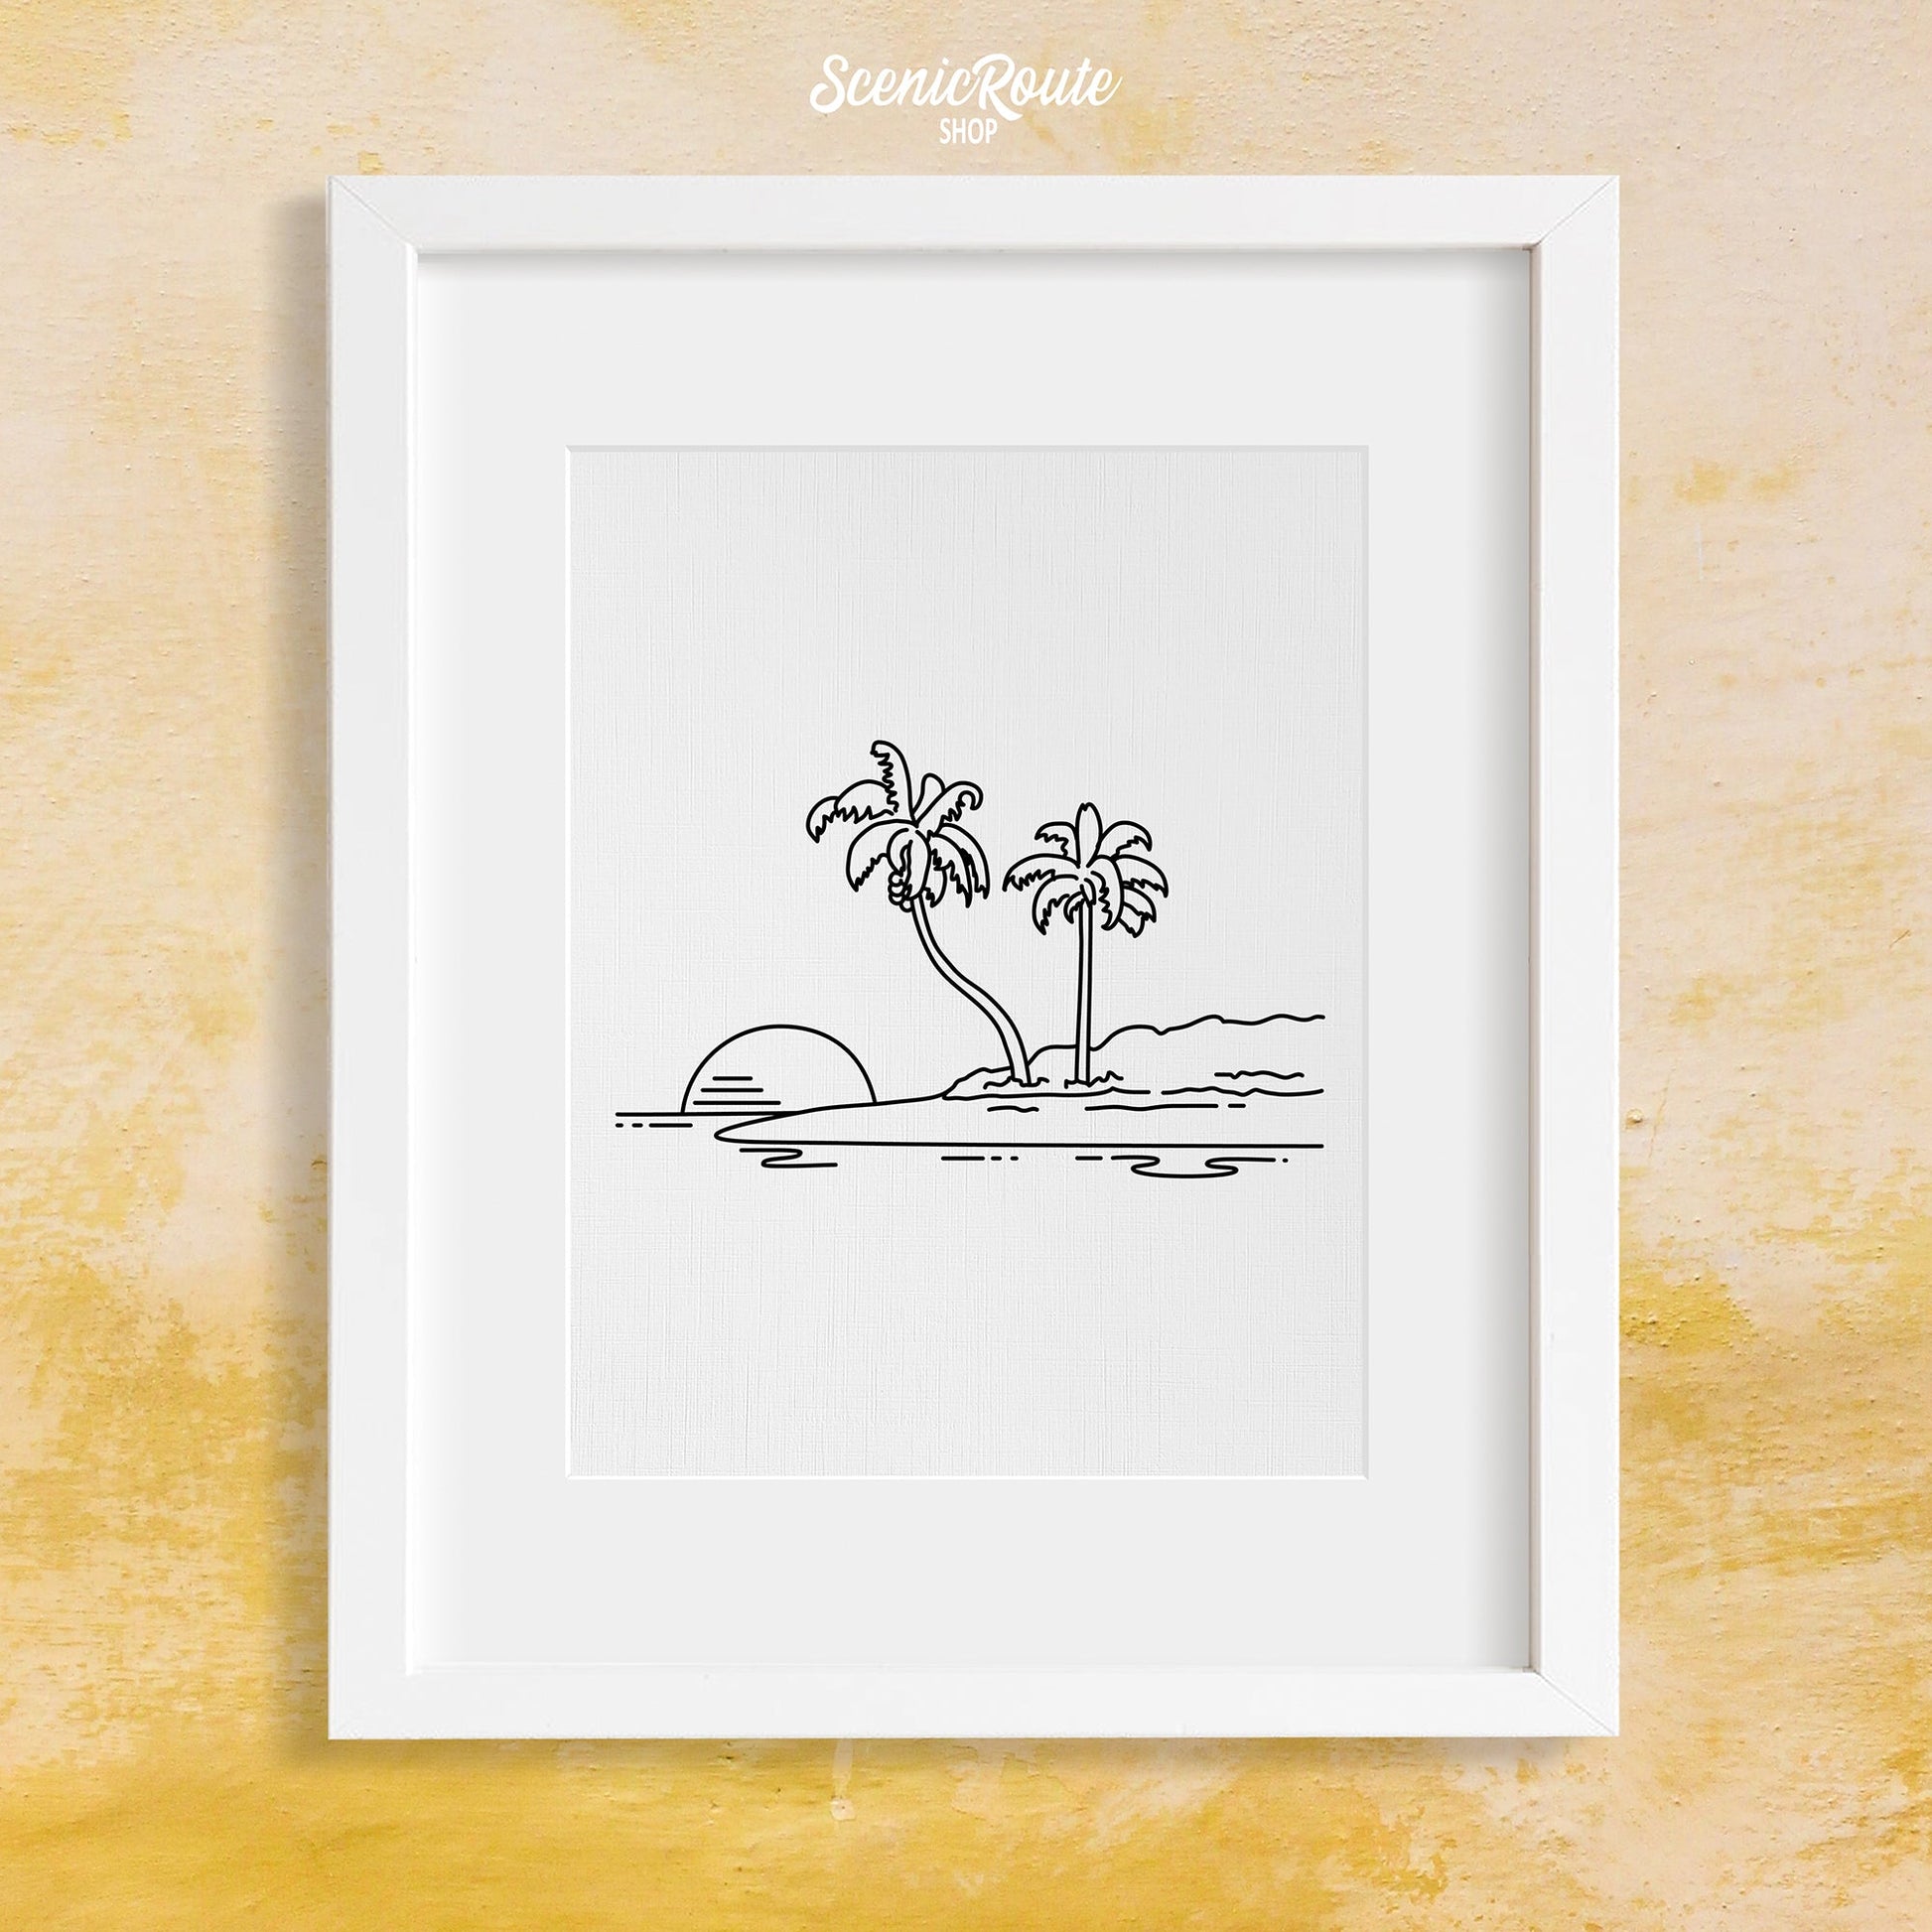 A framed line art drawing of An Island on a yellow wall